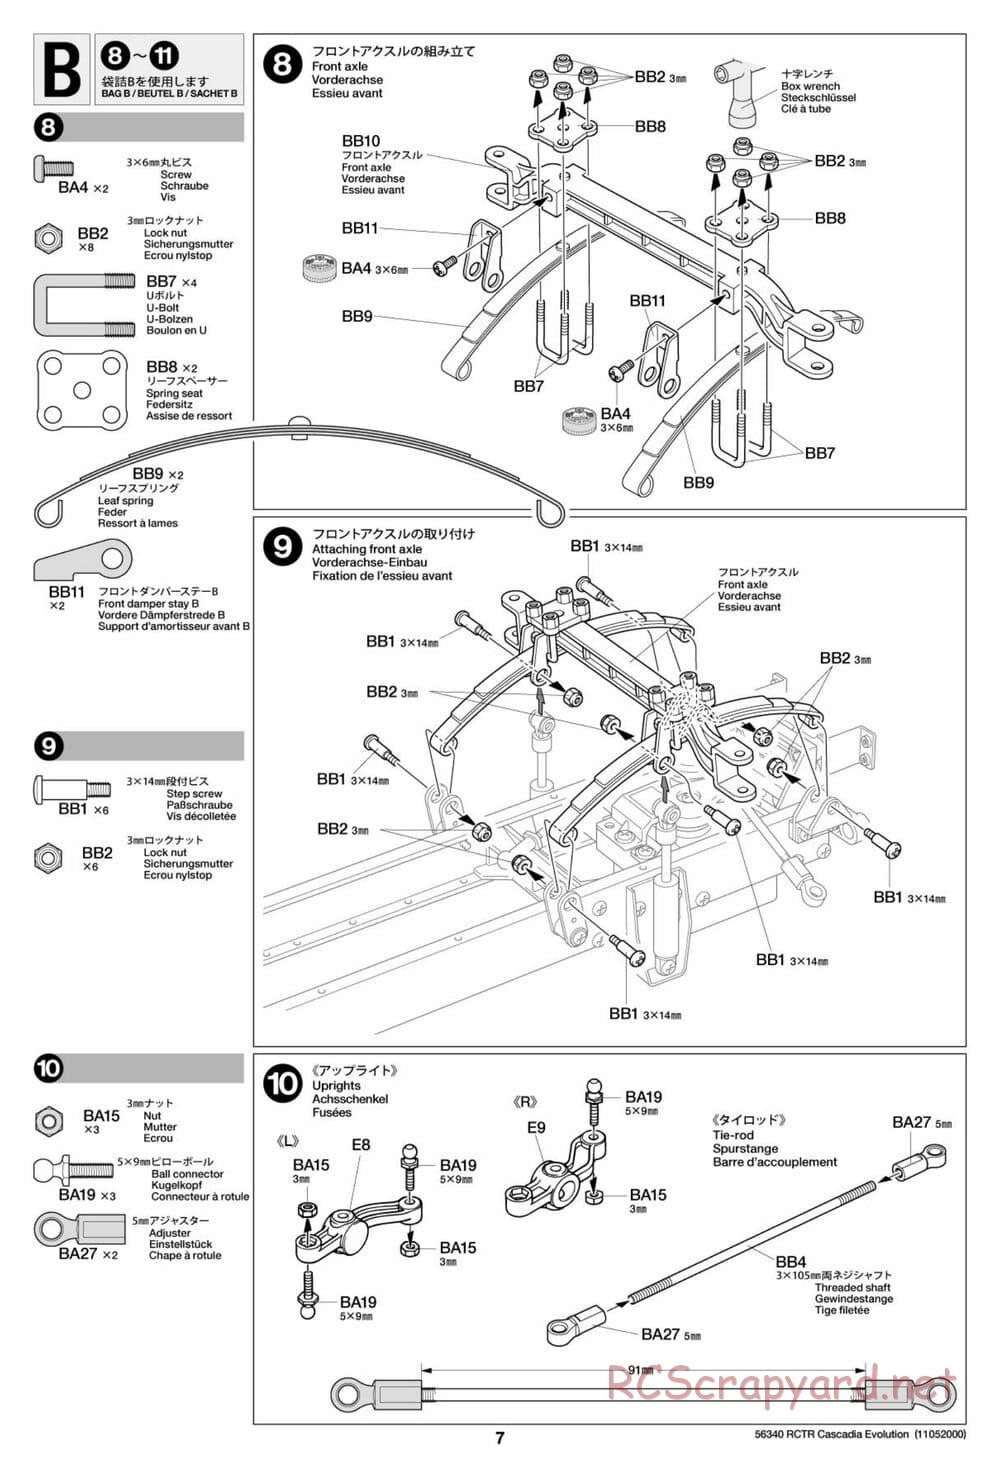 Tamiya - Freightliner Cascadia Evolution Tractor Truck Chassis - Manual - Page 7